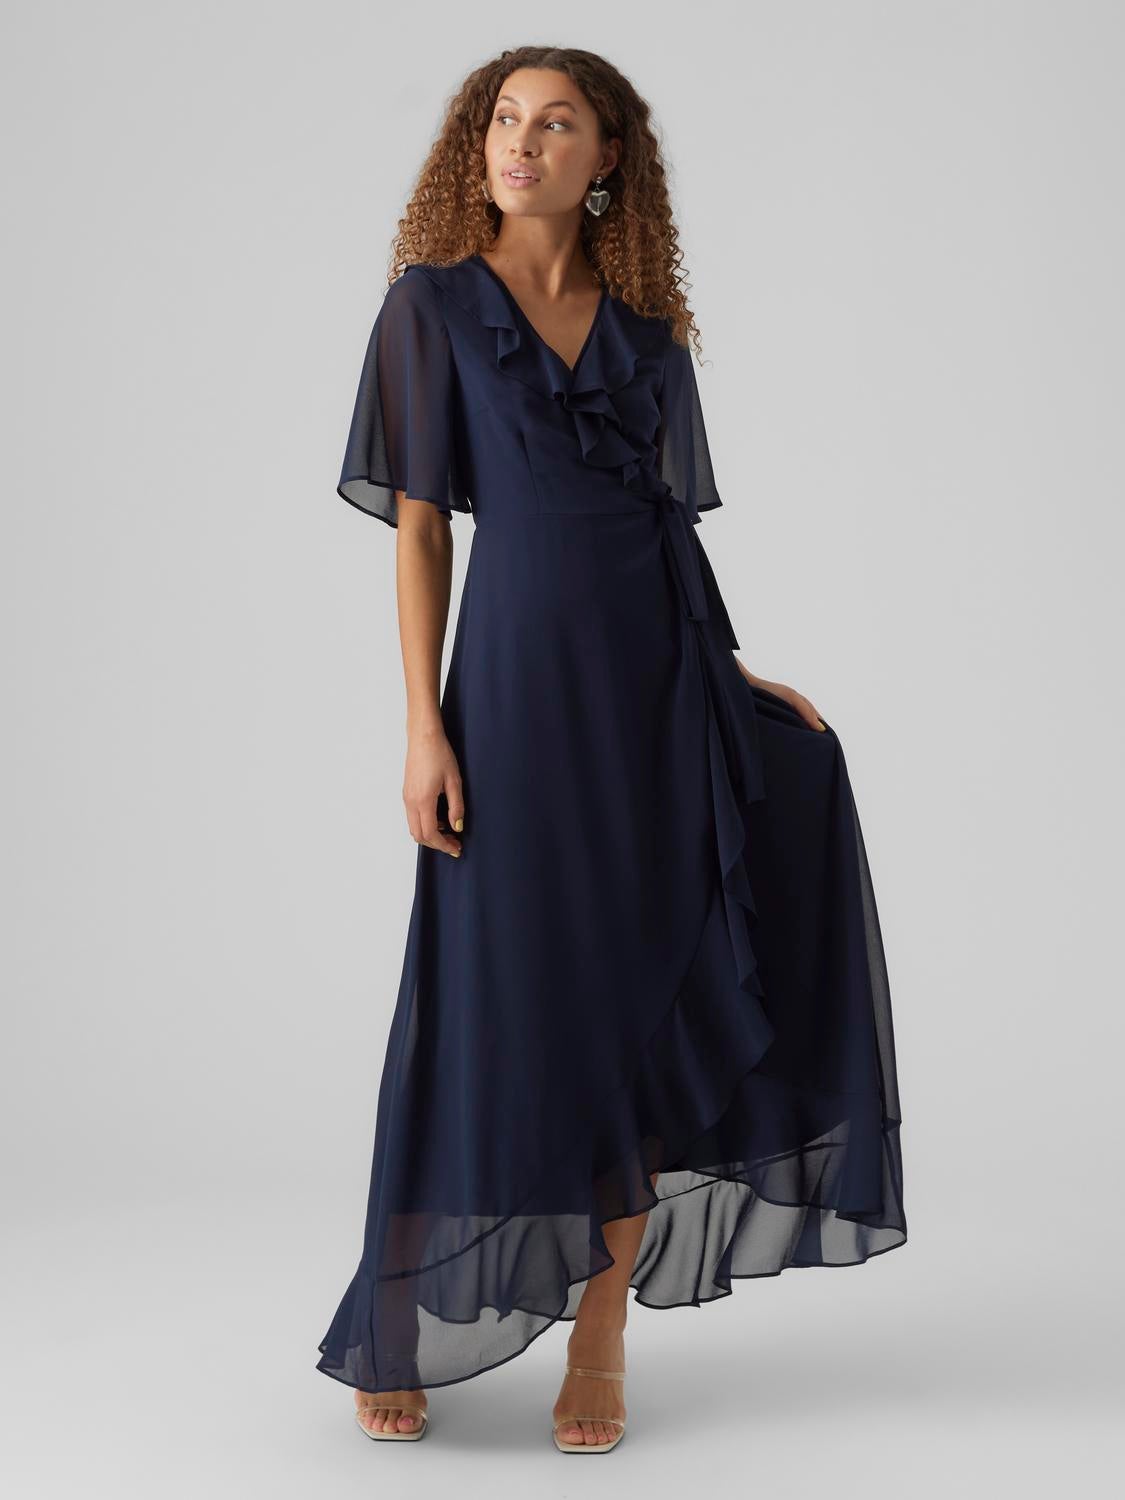 Loose Fit V-Neck Long dress with 30% discount! | Vero Moda®